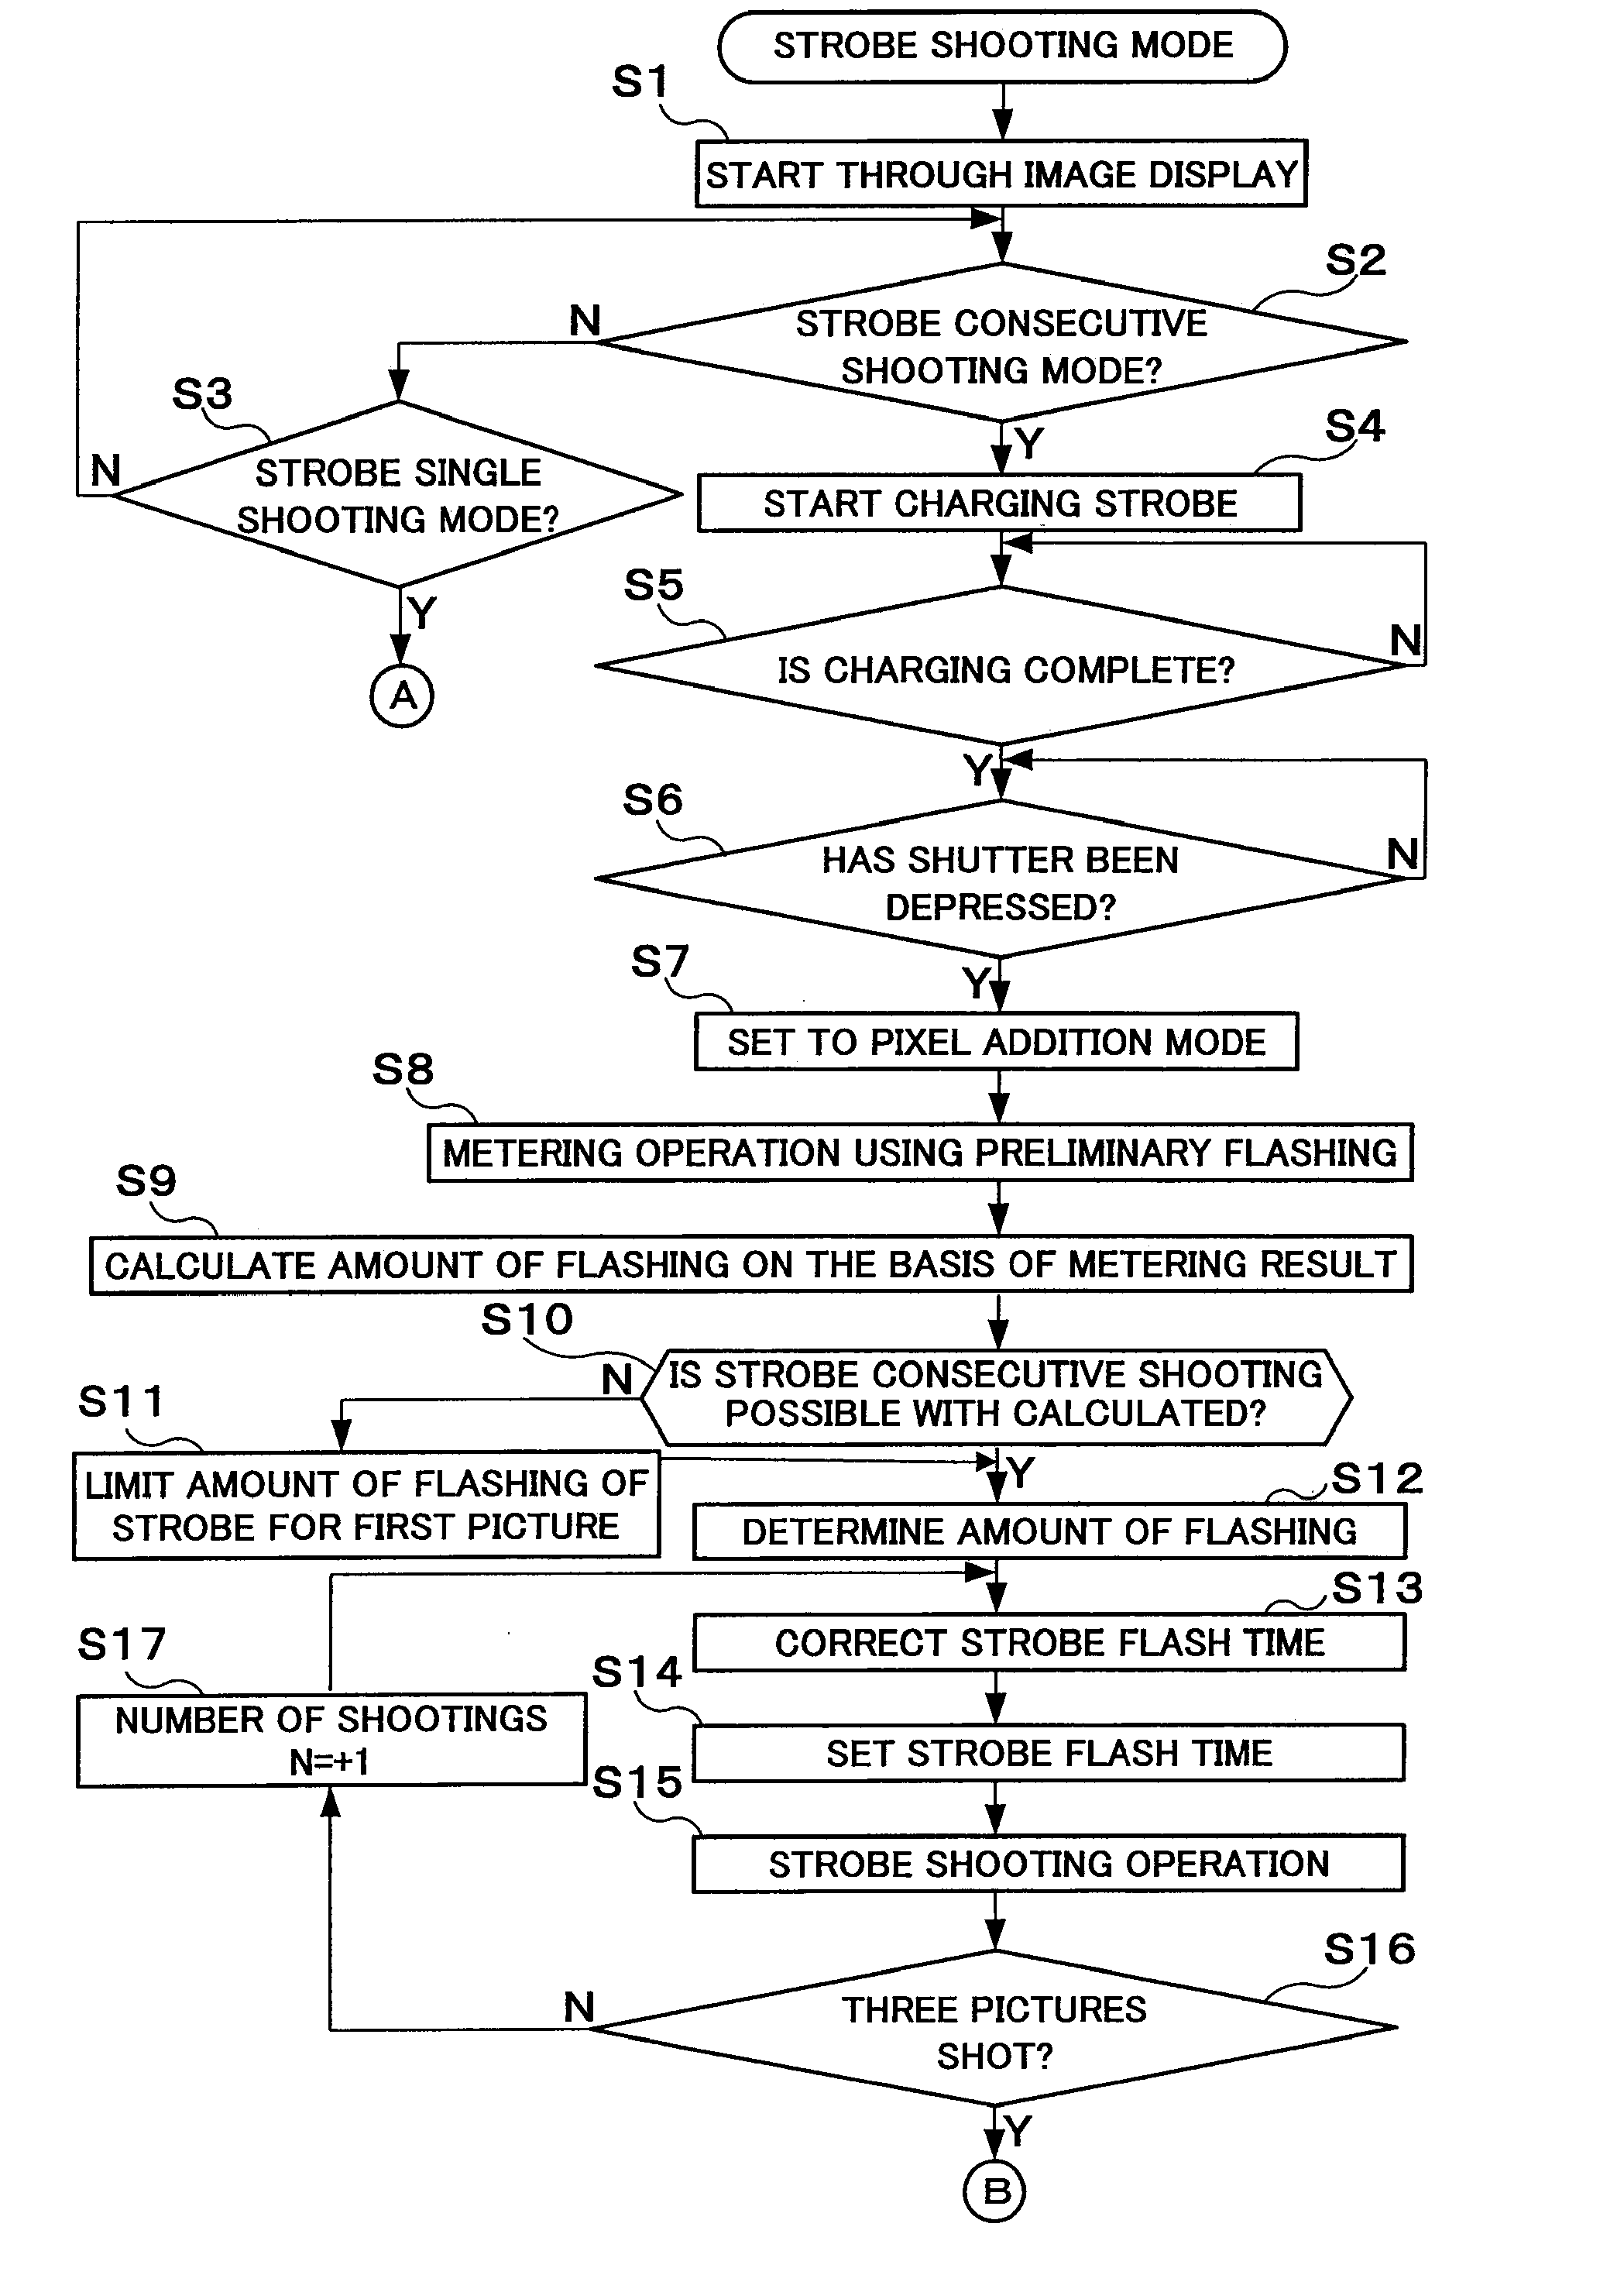 Imaging apparatus with strobe consecutive shooting mode